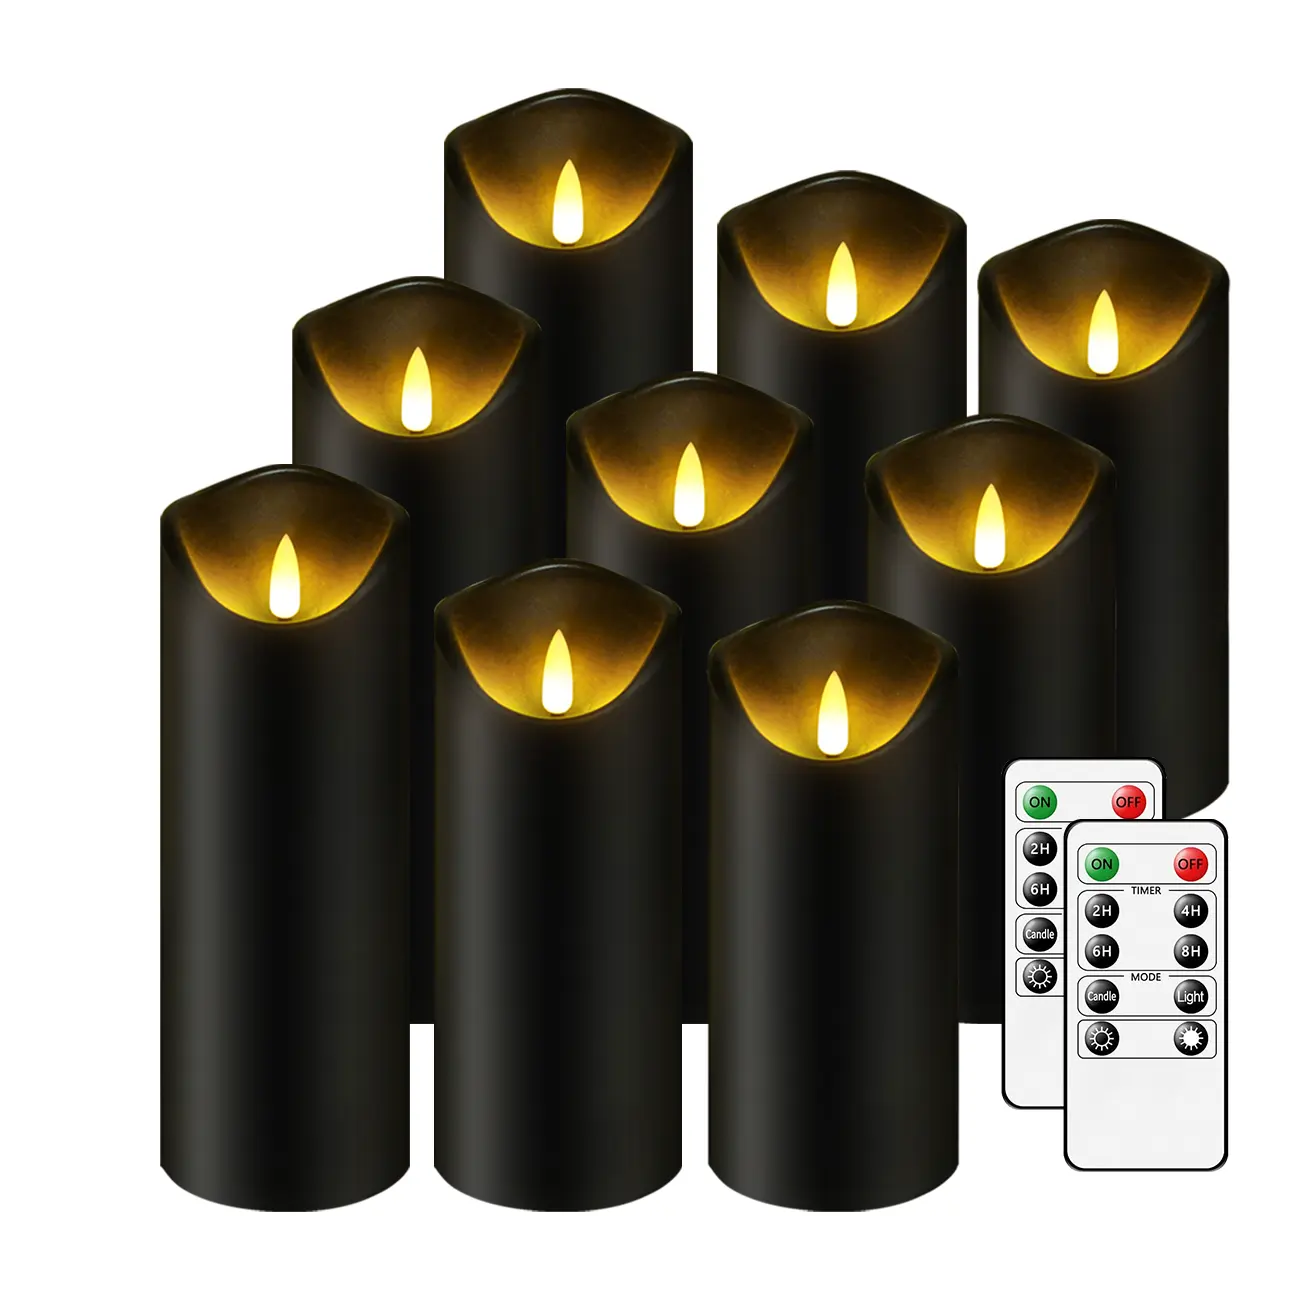 LED candles set for Halloween remote flickring candles flameless AA battery candle with new style bullet wick replaced